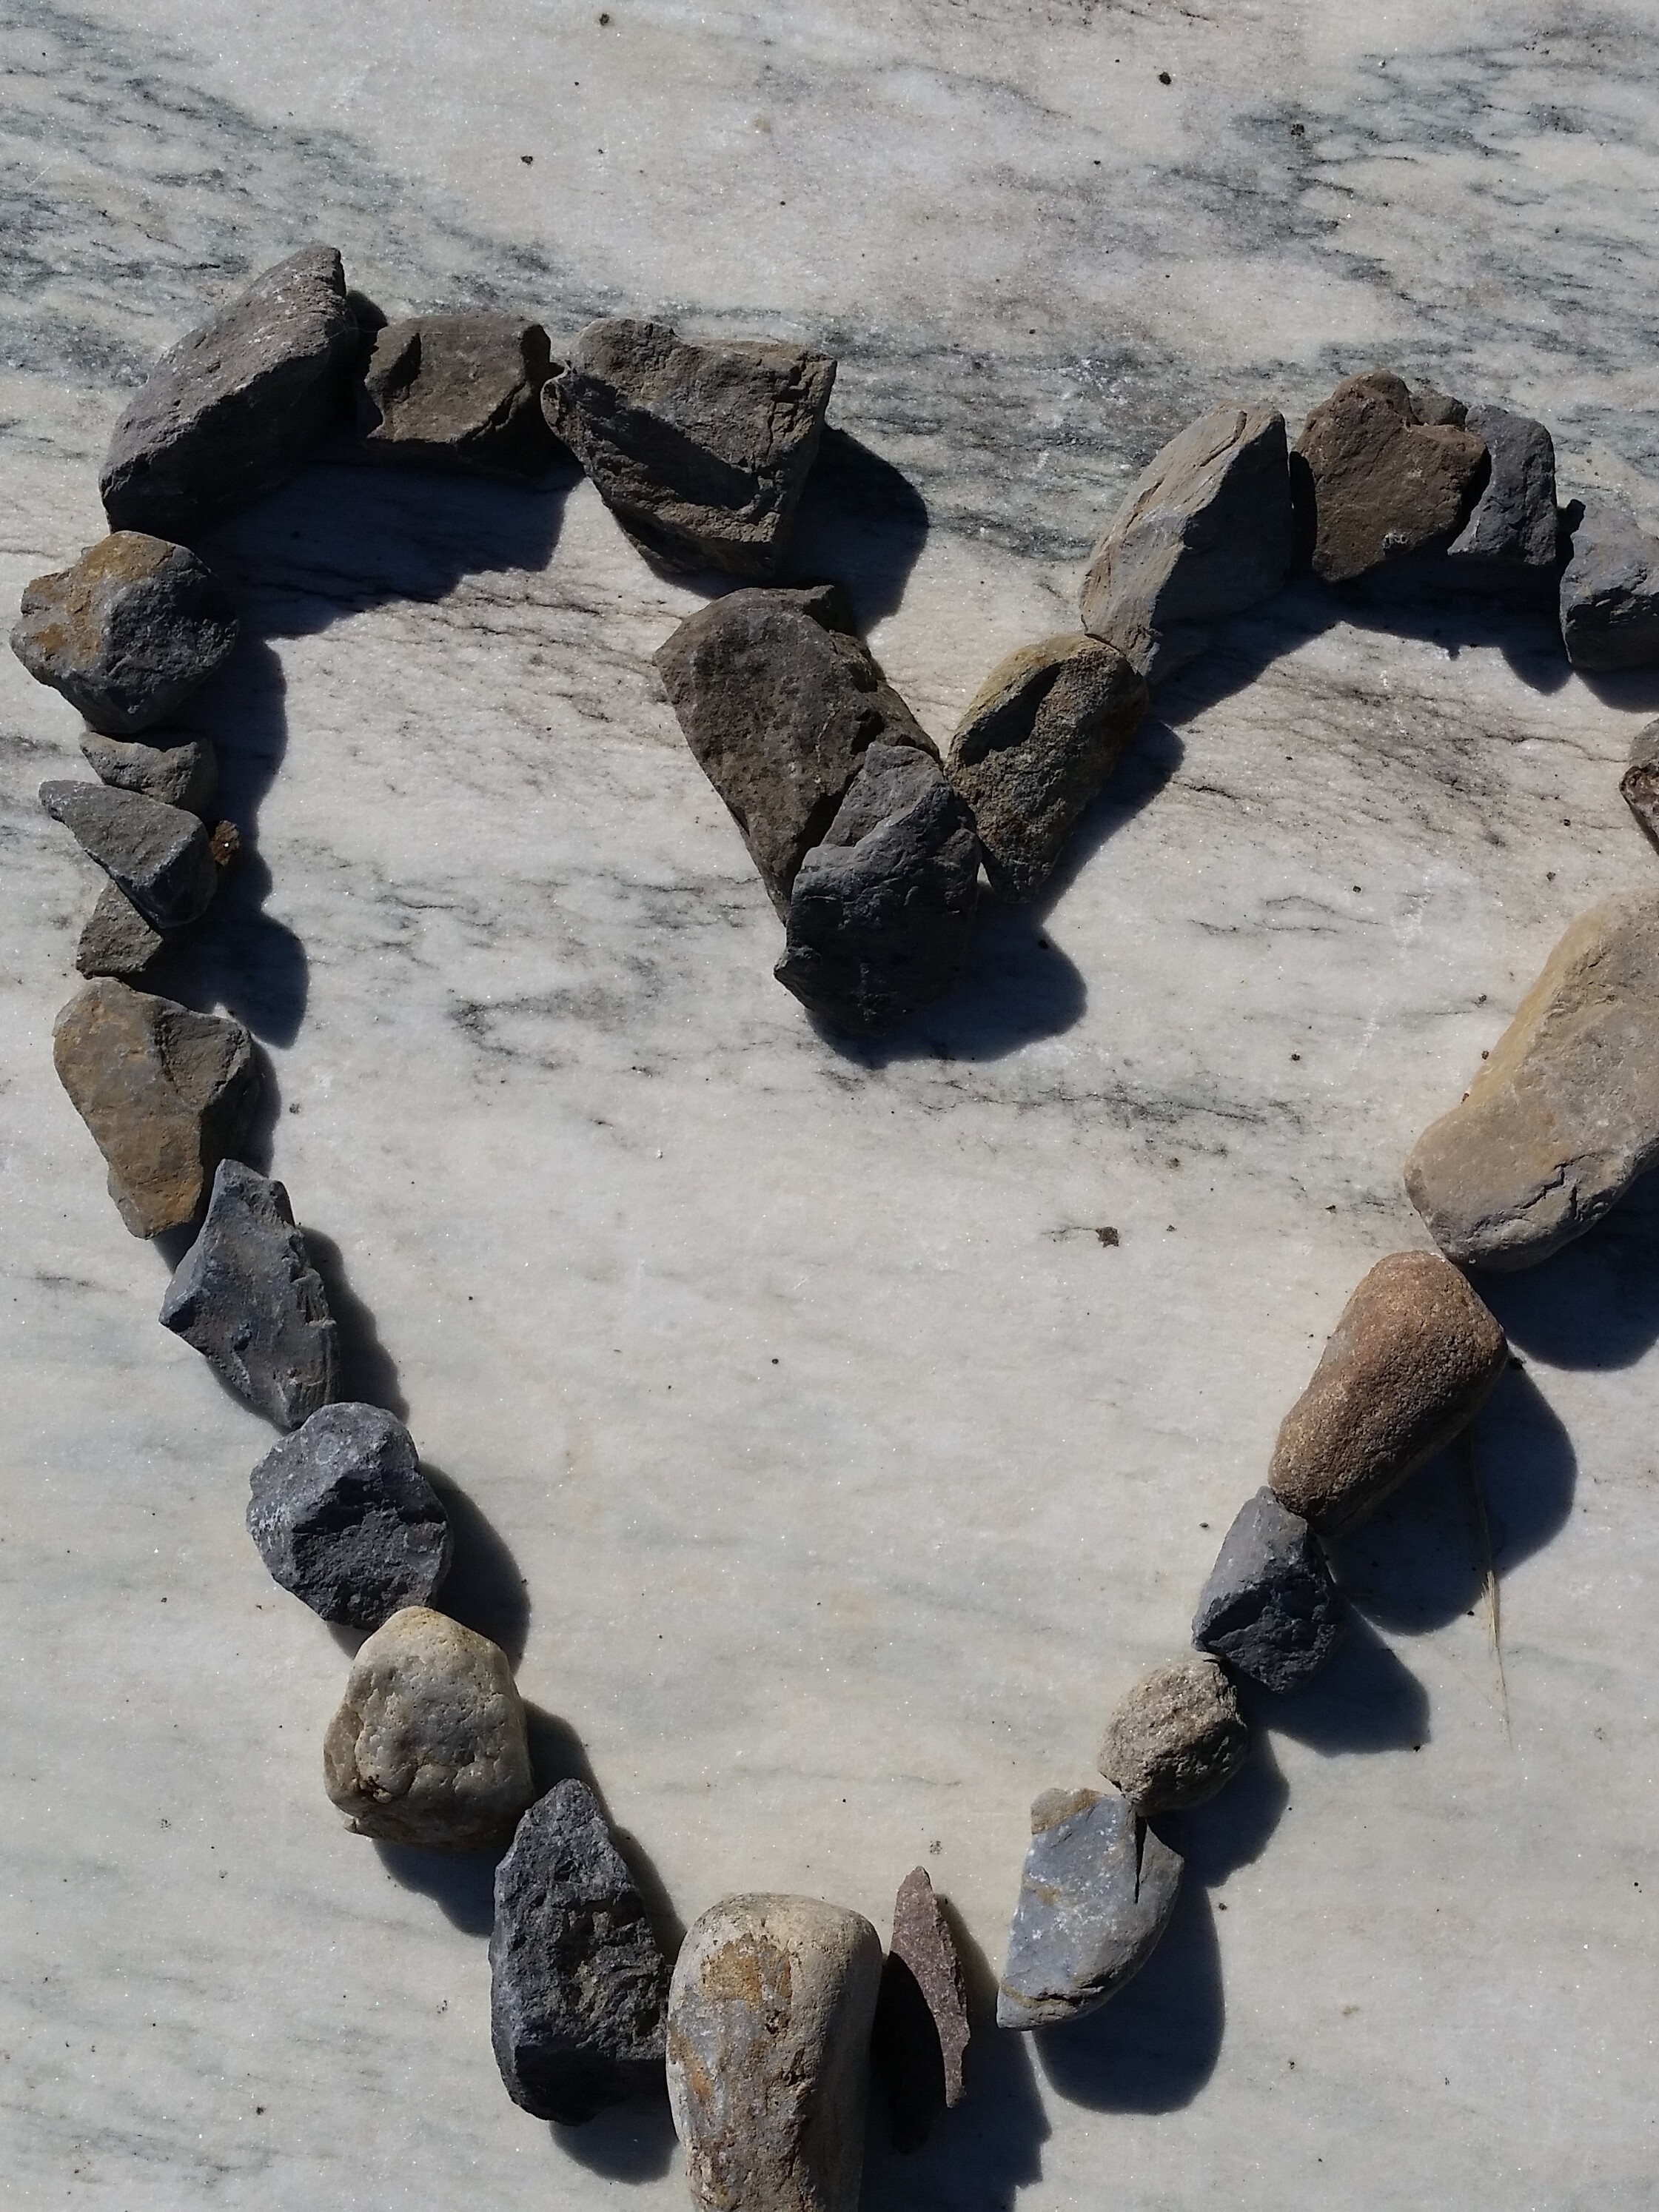 Rocks positioned in the shape of a heart